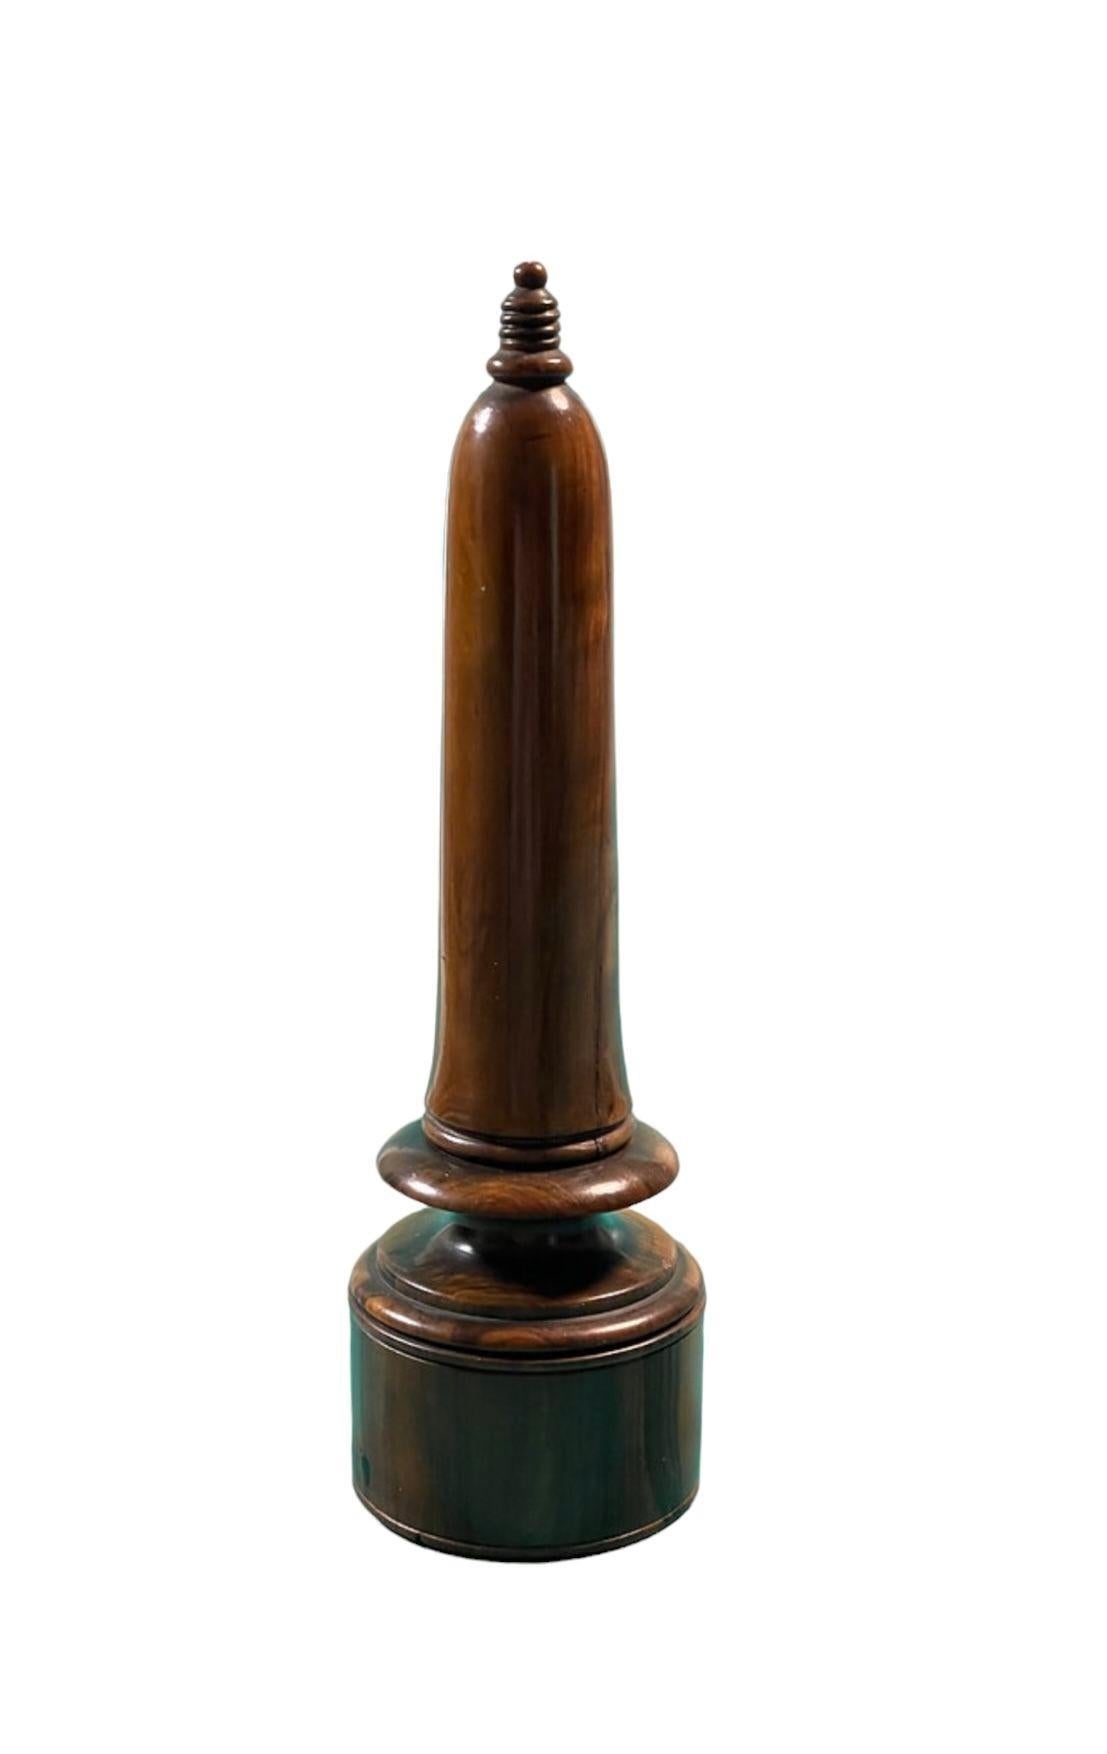 British Antique Treen Traveling Candlestick and Match Holder, 19th Century